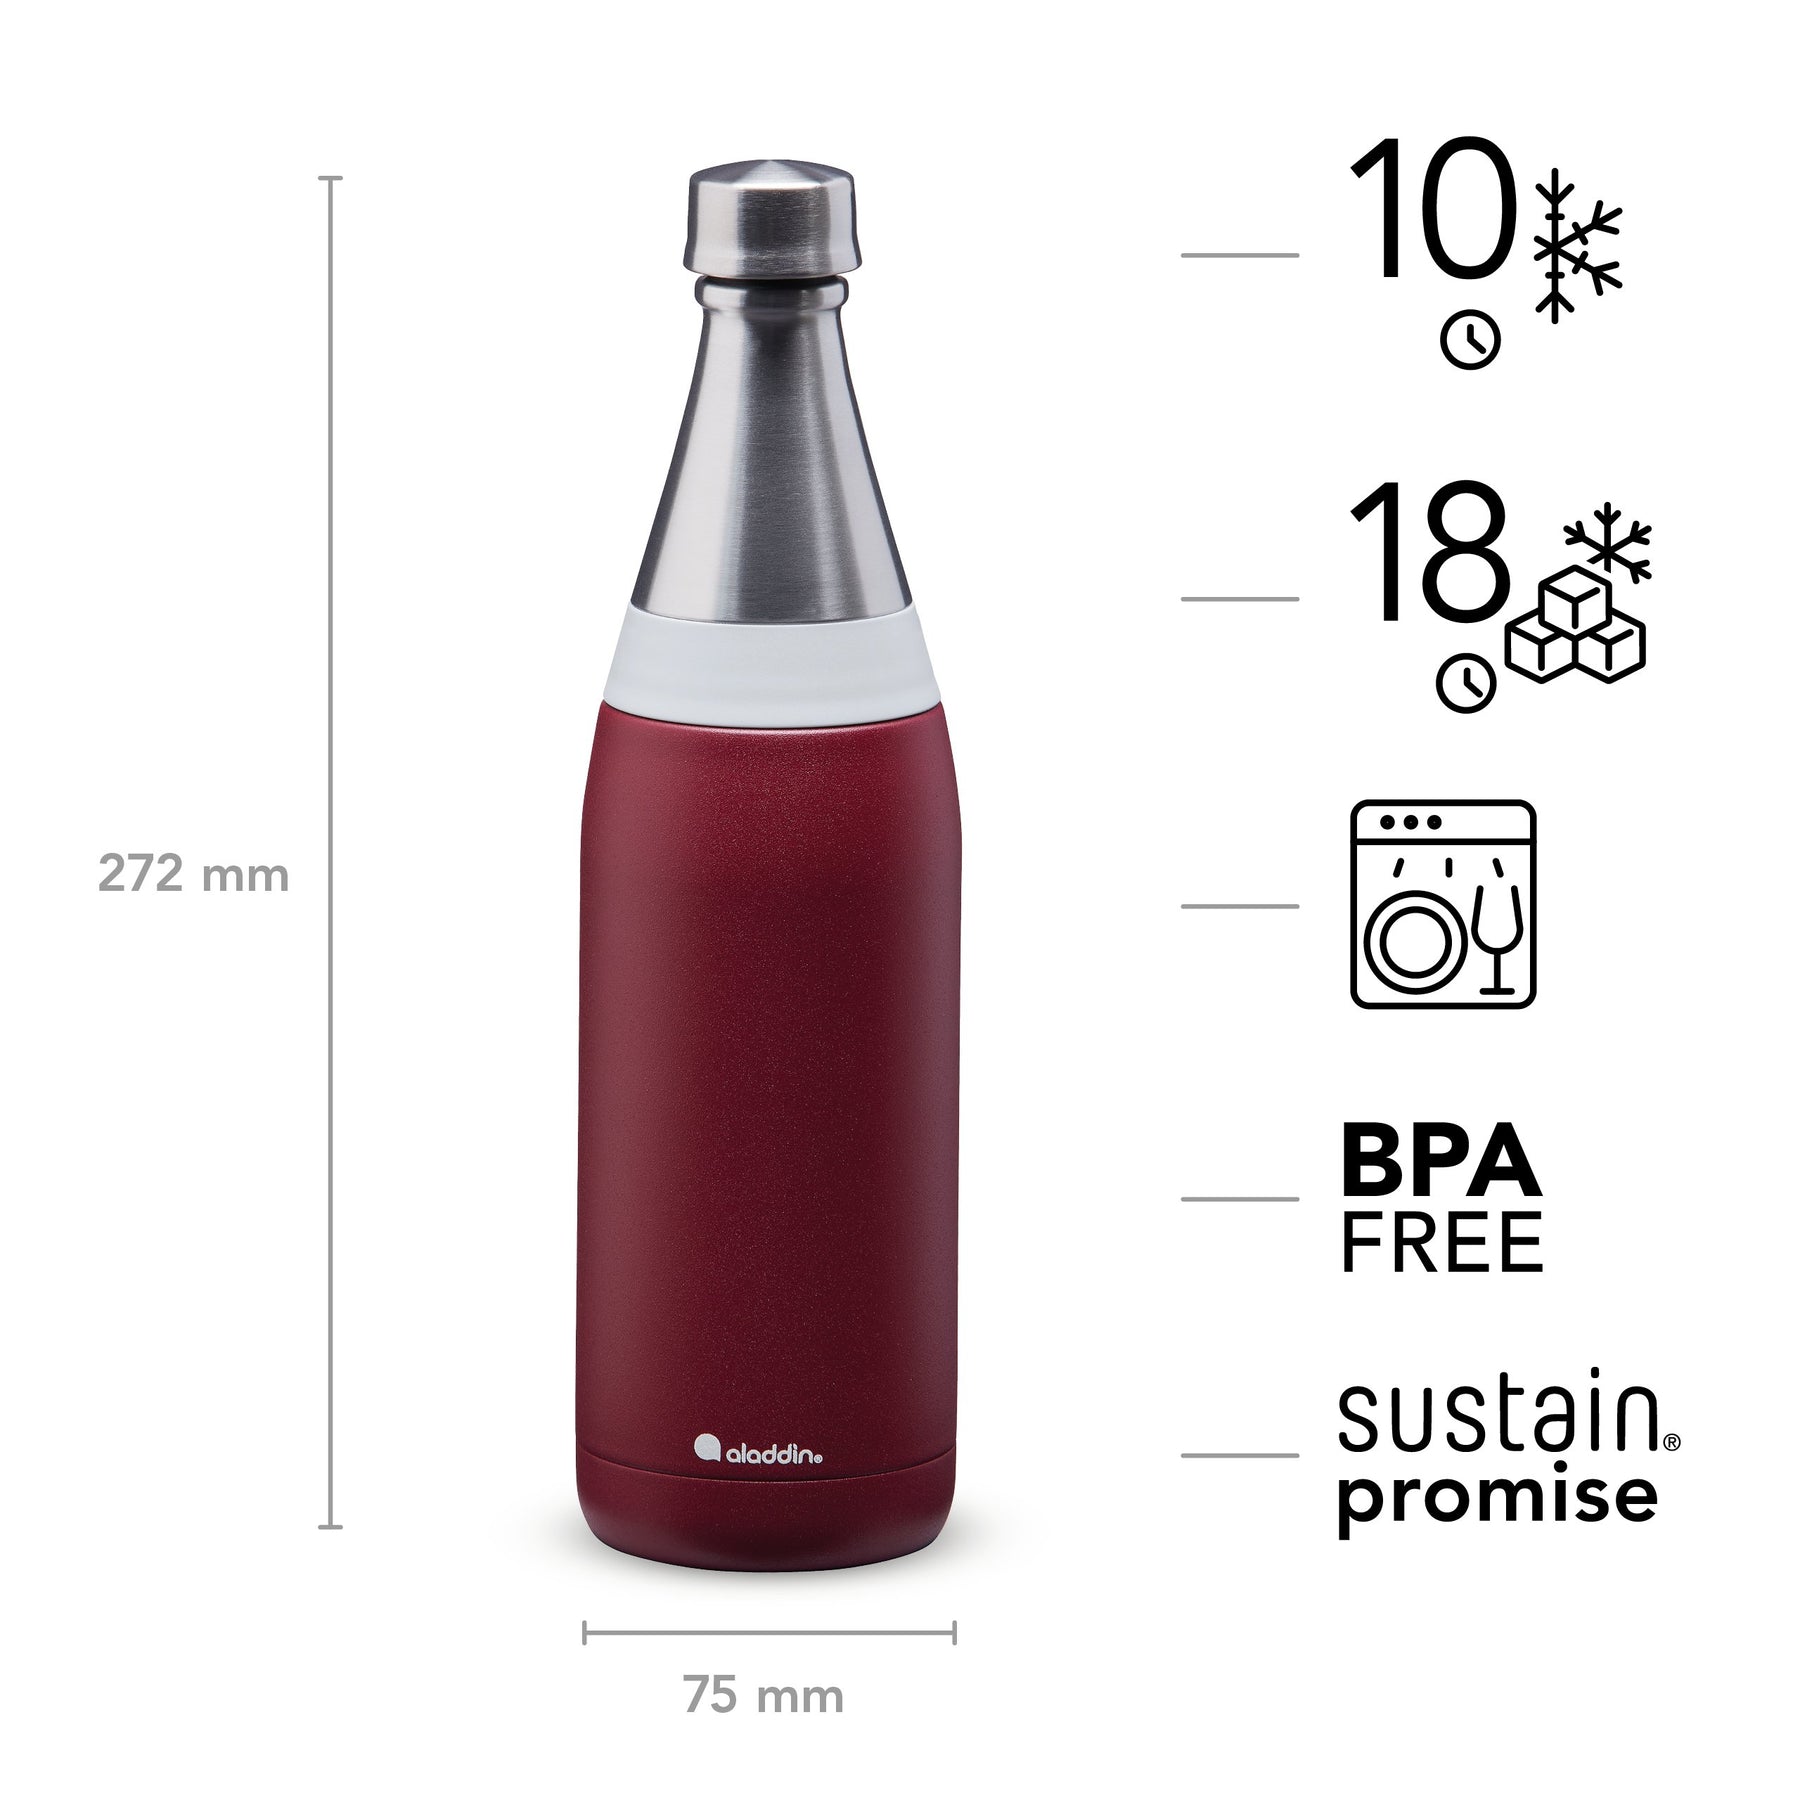 Aladdin-Fresco-Thermavac_-Stainless-Steel-Water-Bottle-0.6L-Burgundy-Red-10-10098-005-Icons-Front_1800x1800